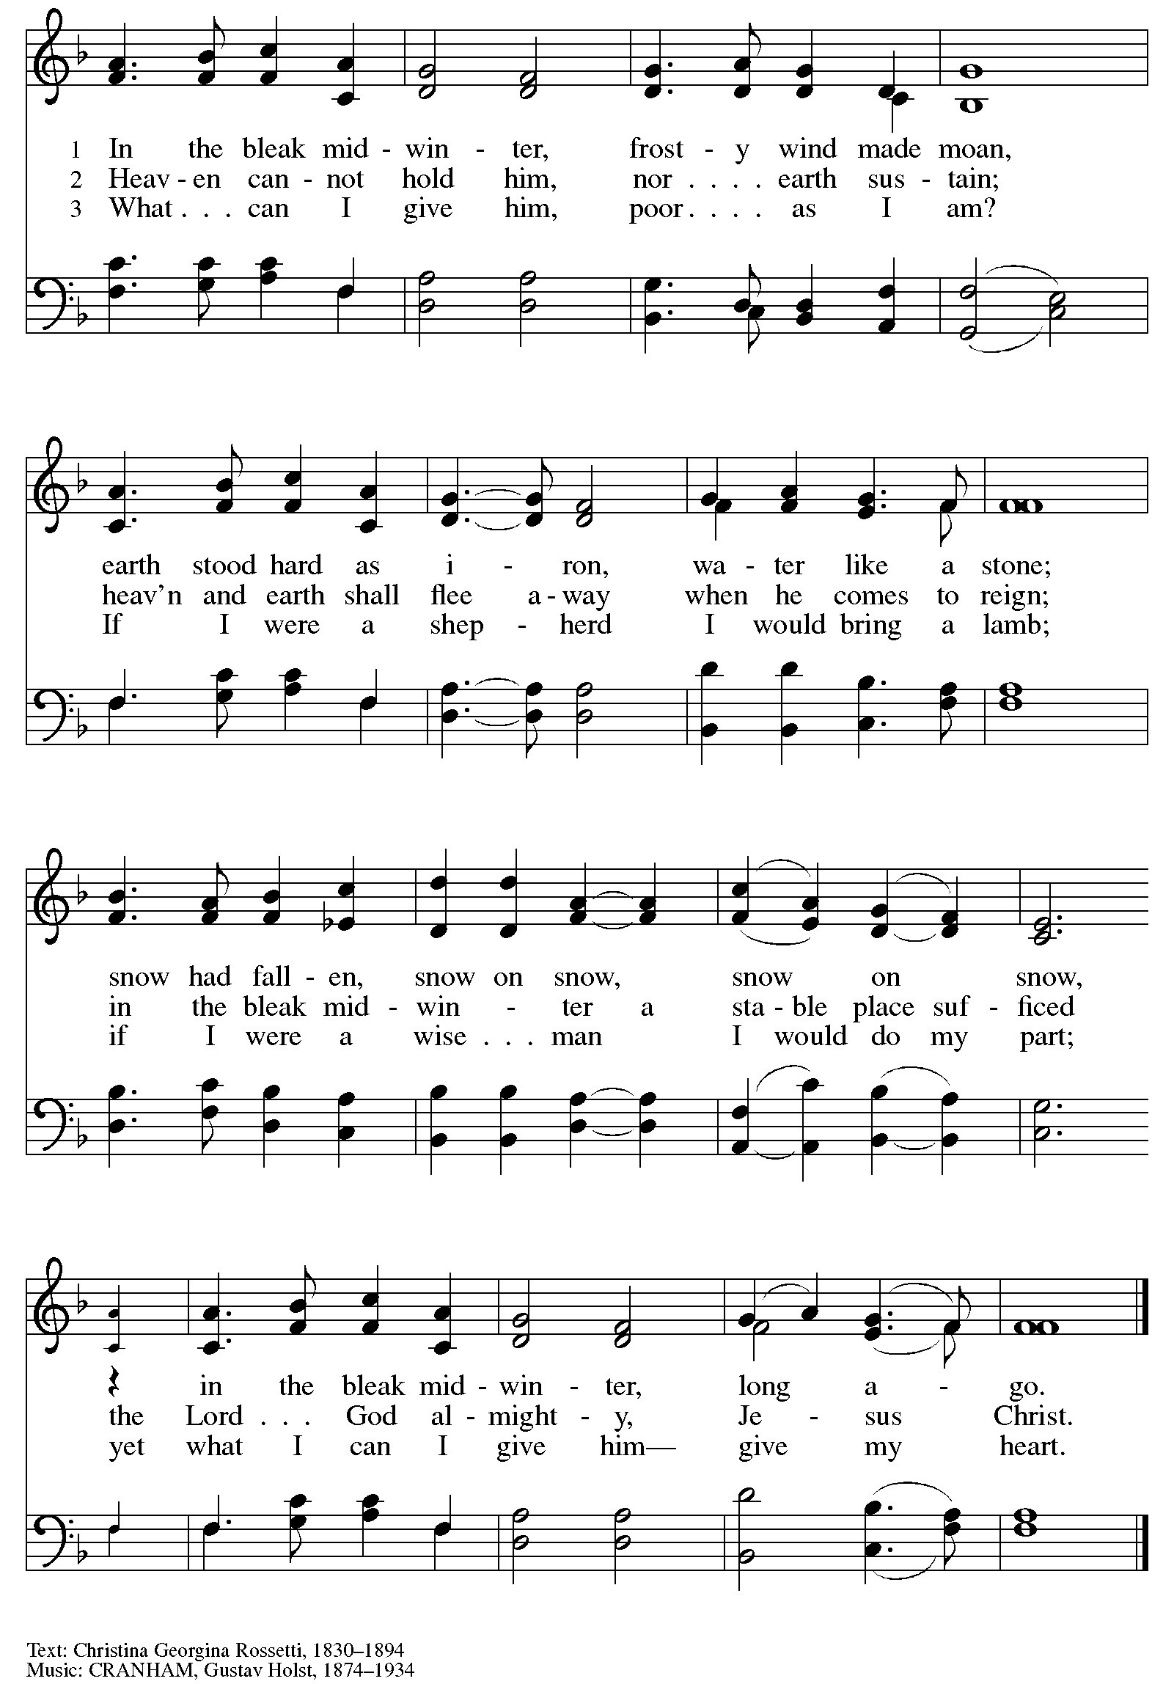 A sheet music with text and notes Description automatically generated